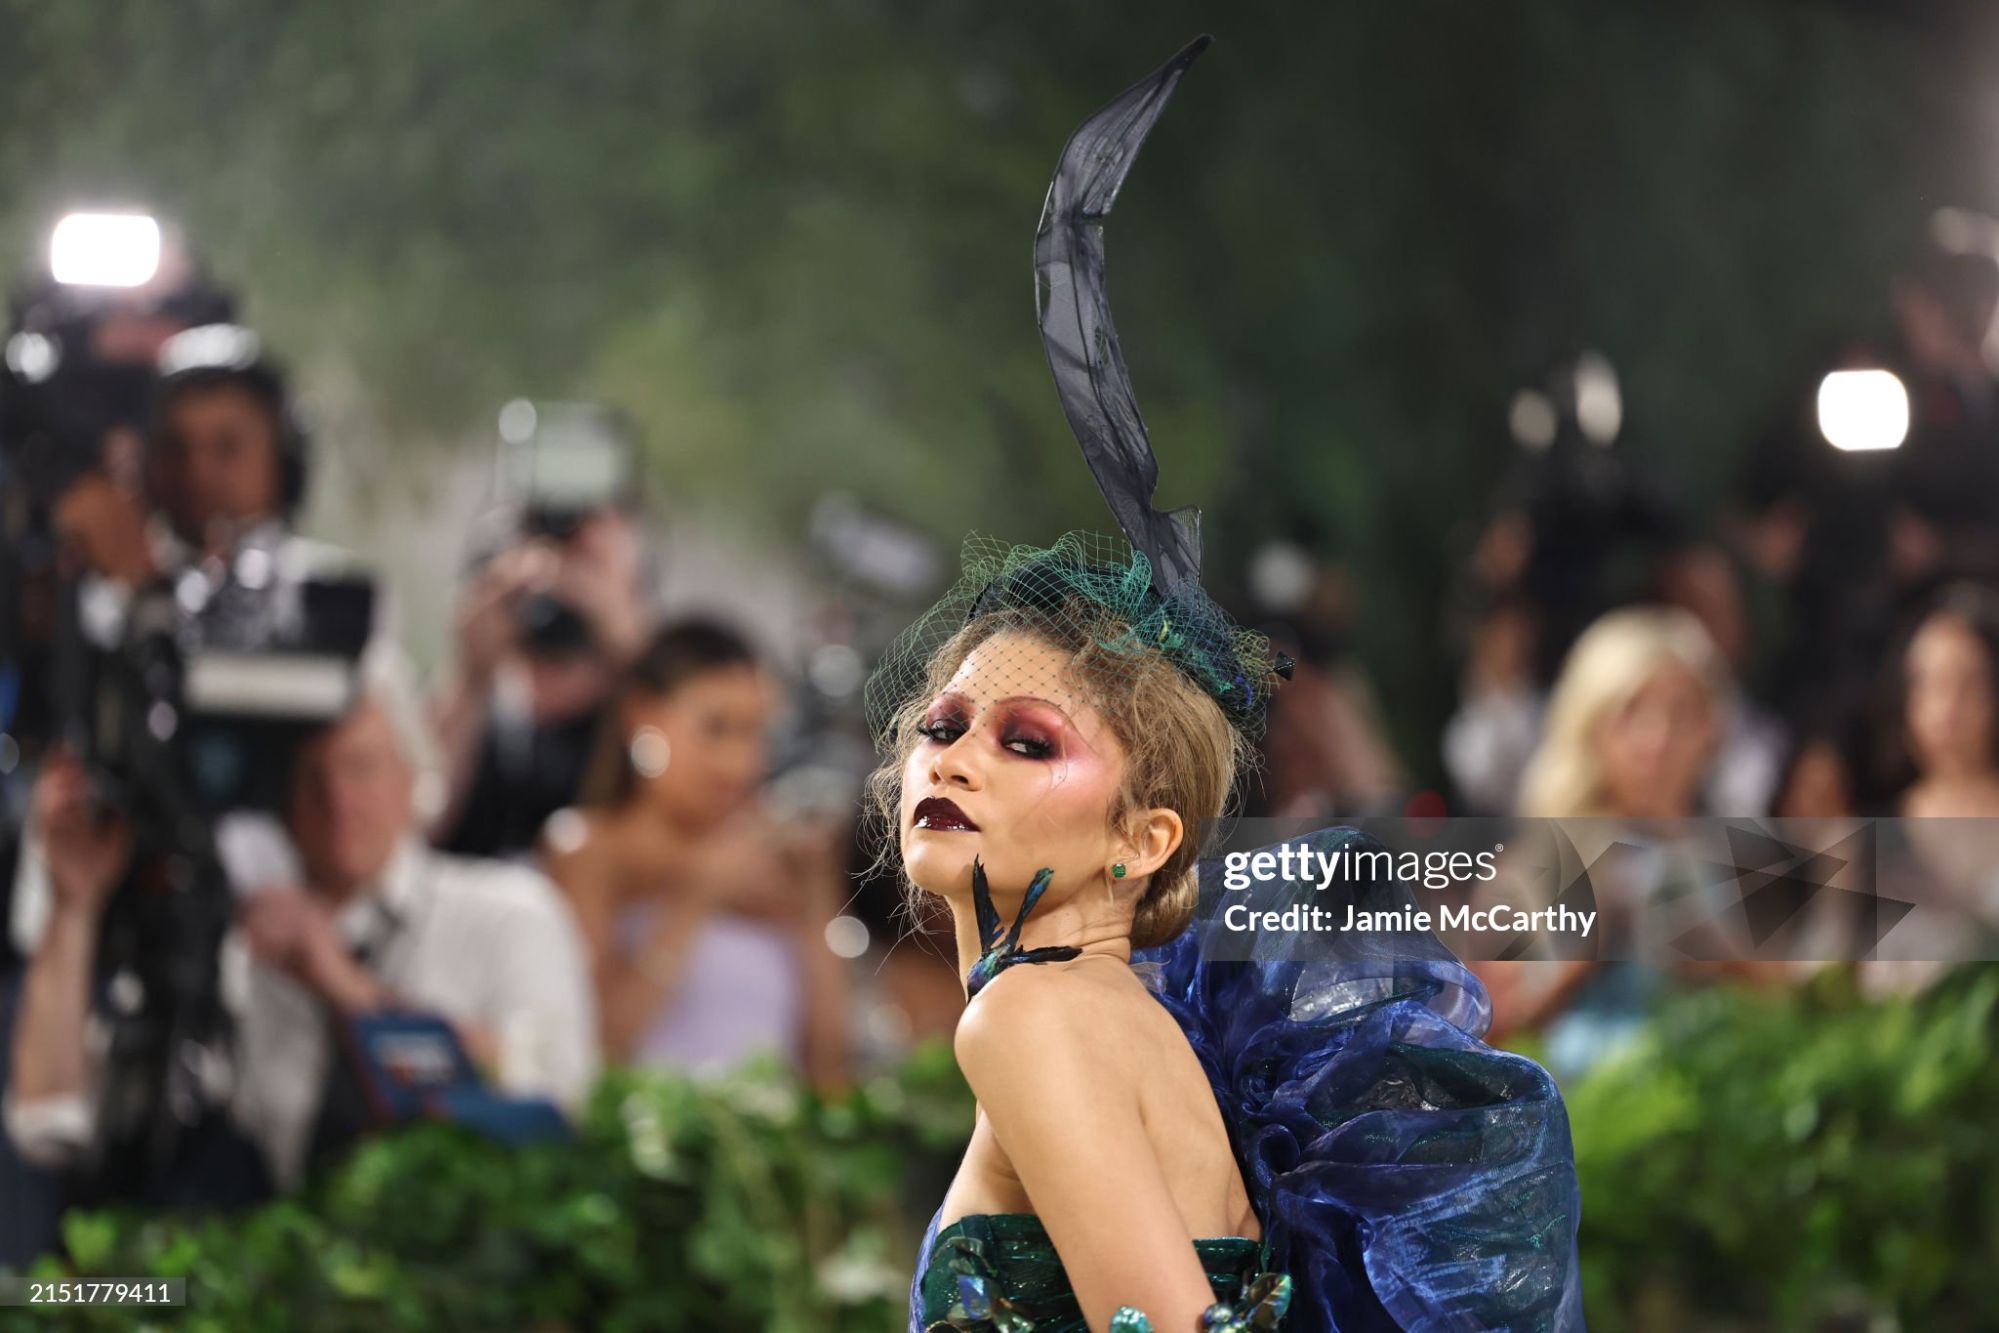 gettyimages-2151779411-2048x2048.jpg